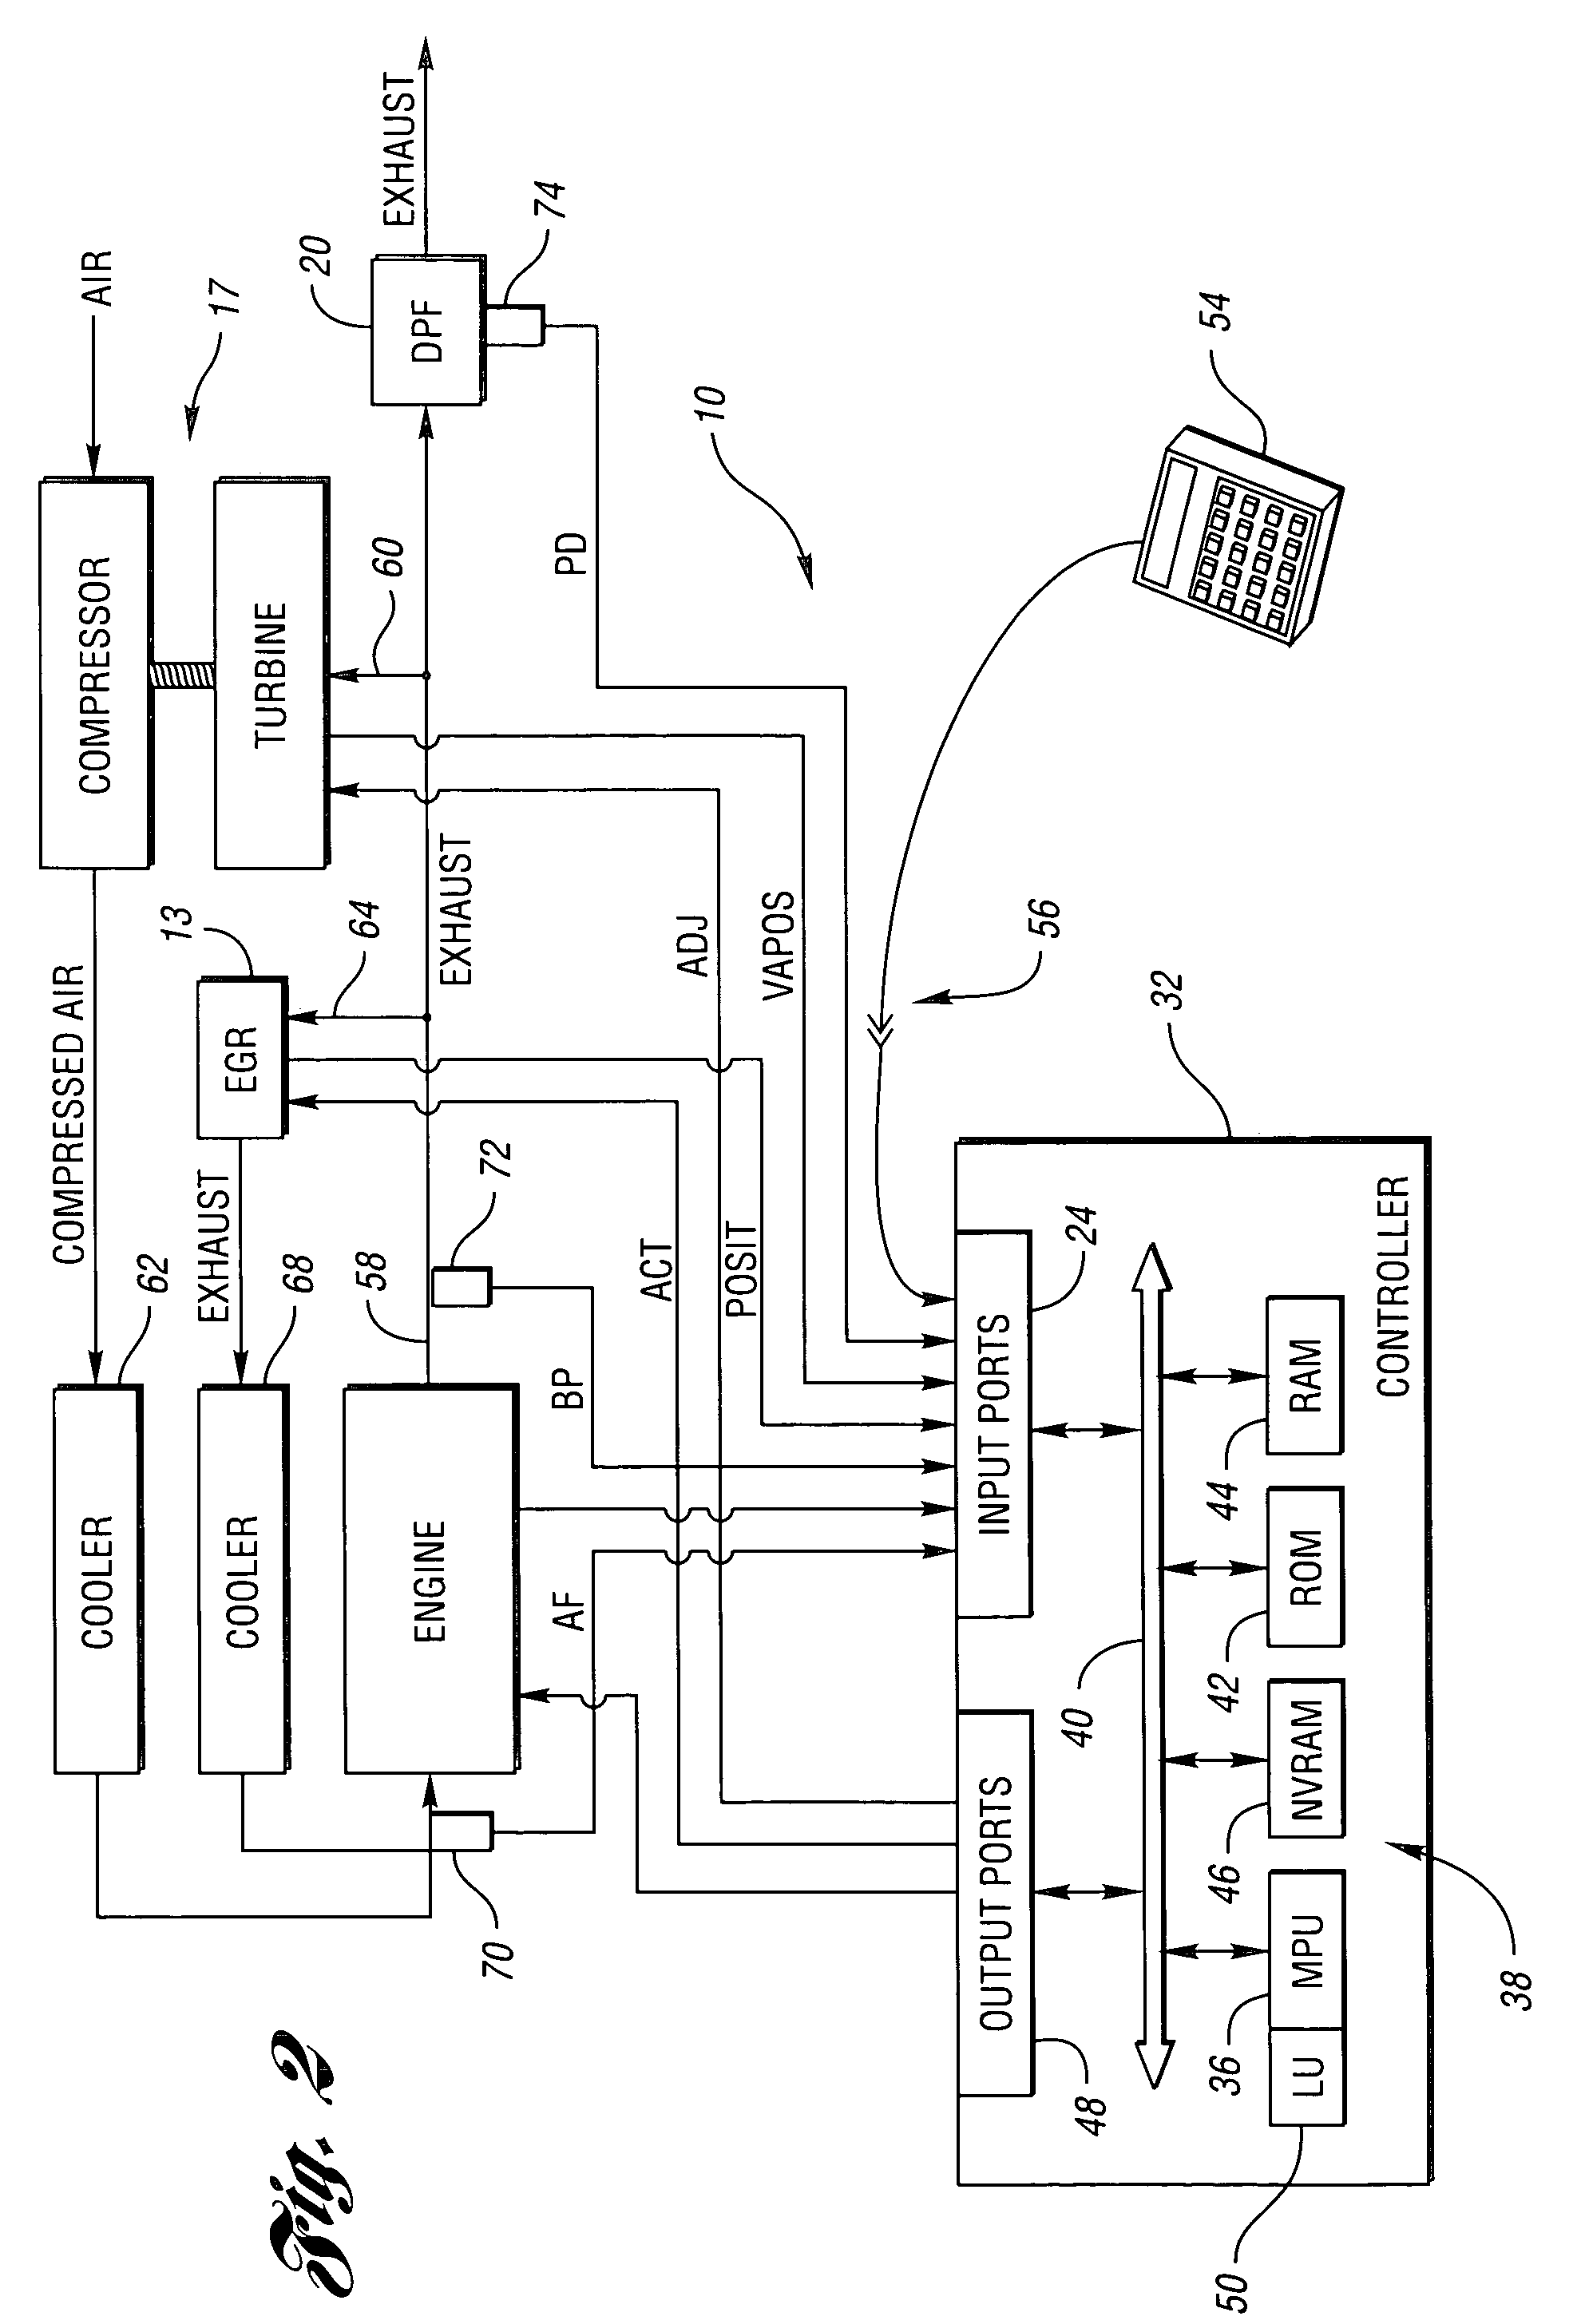 System and method for backpressure compensation for controlling exhaust gas particulate emissions